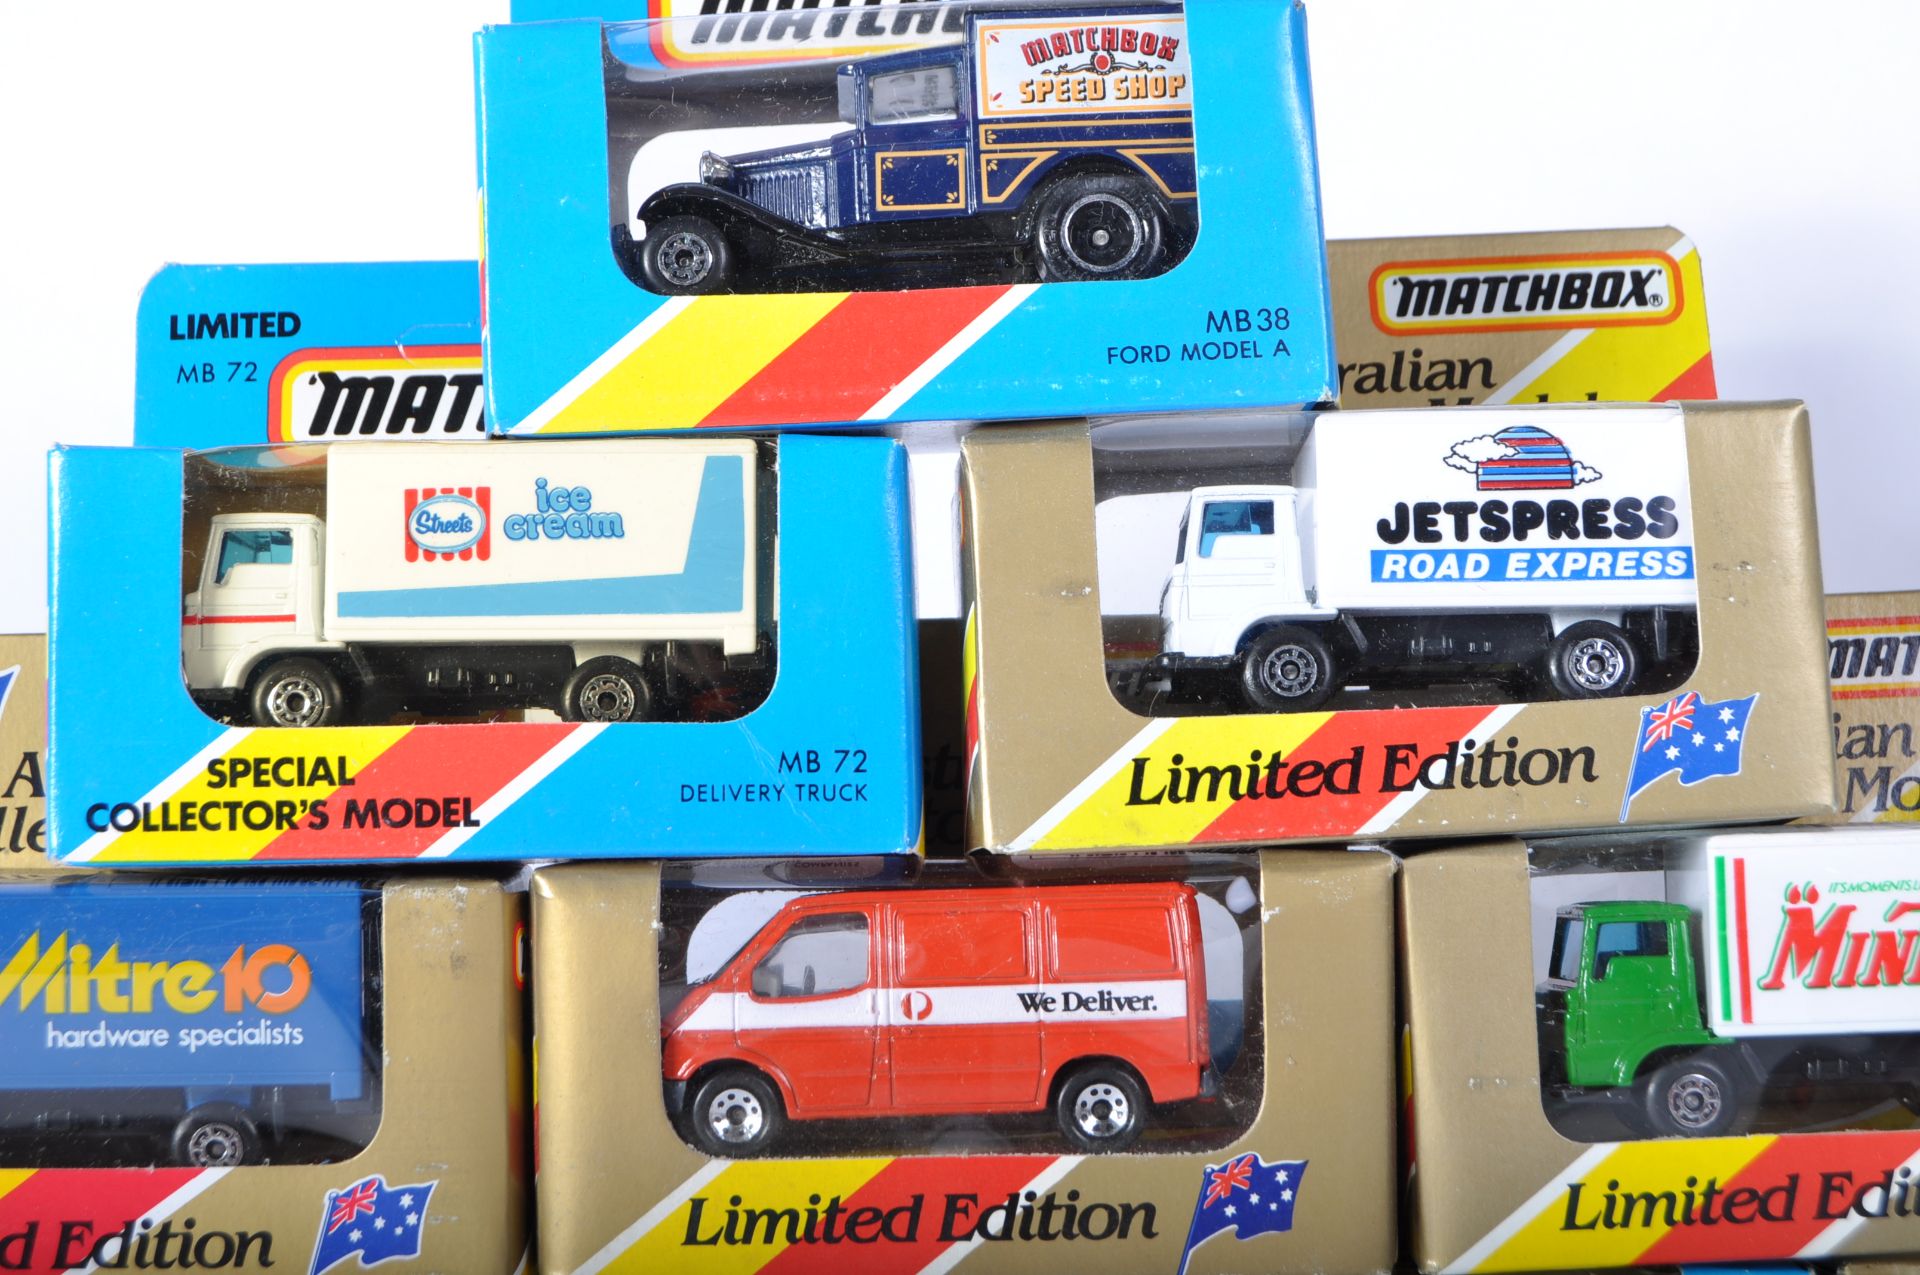 COLLECTION OF VVINTAGE MATCHBOX DIECAST MODEL CARS - Image 3 of 5